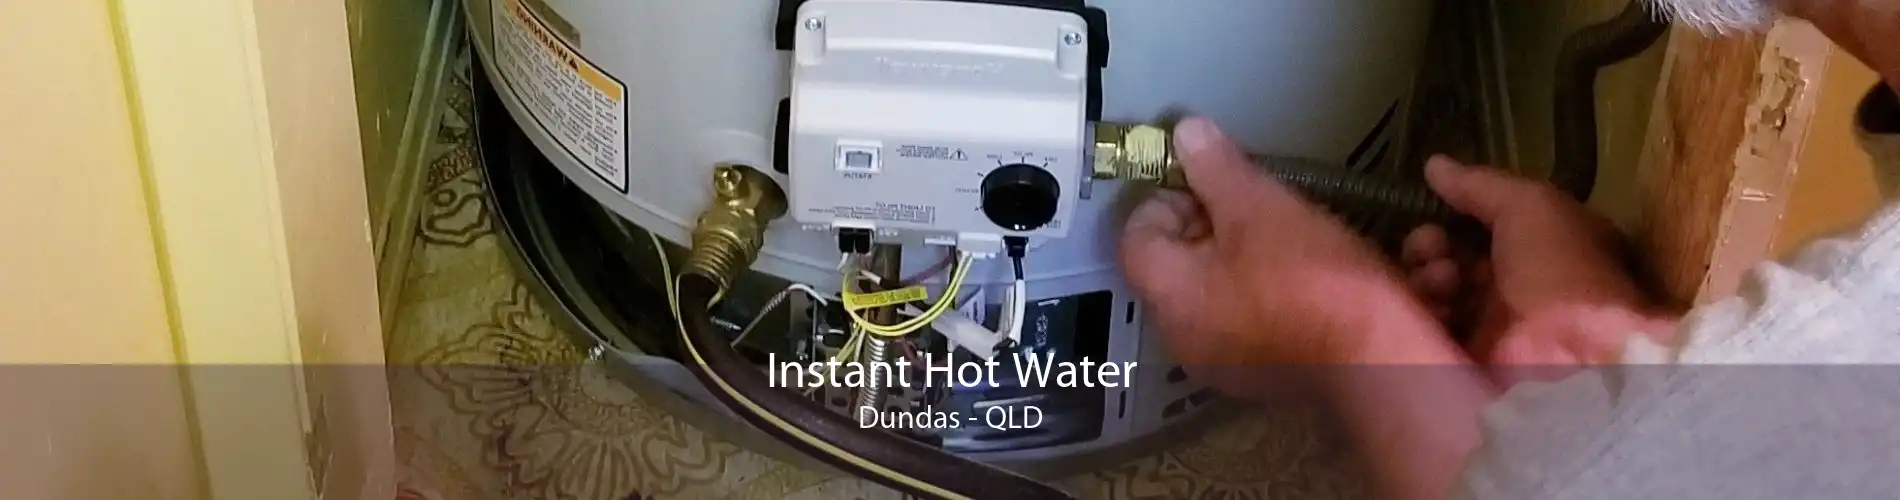 Instant Hot Water Dundas - QLD